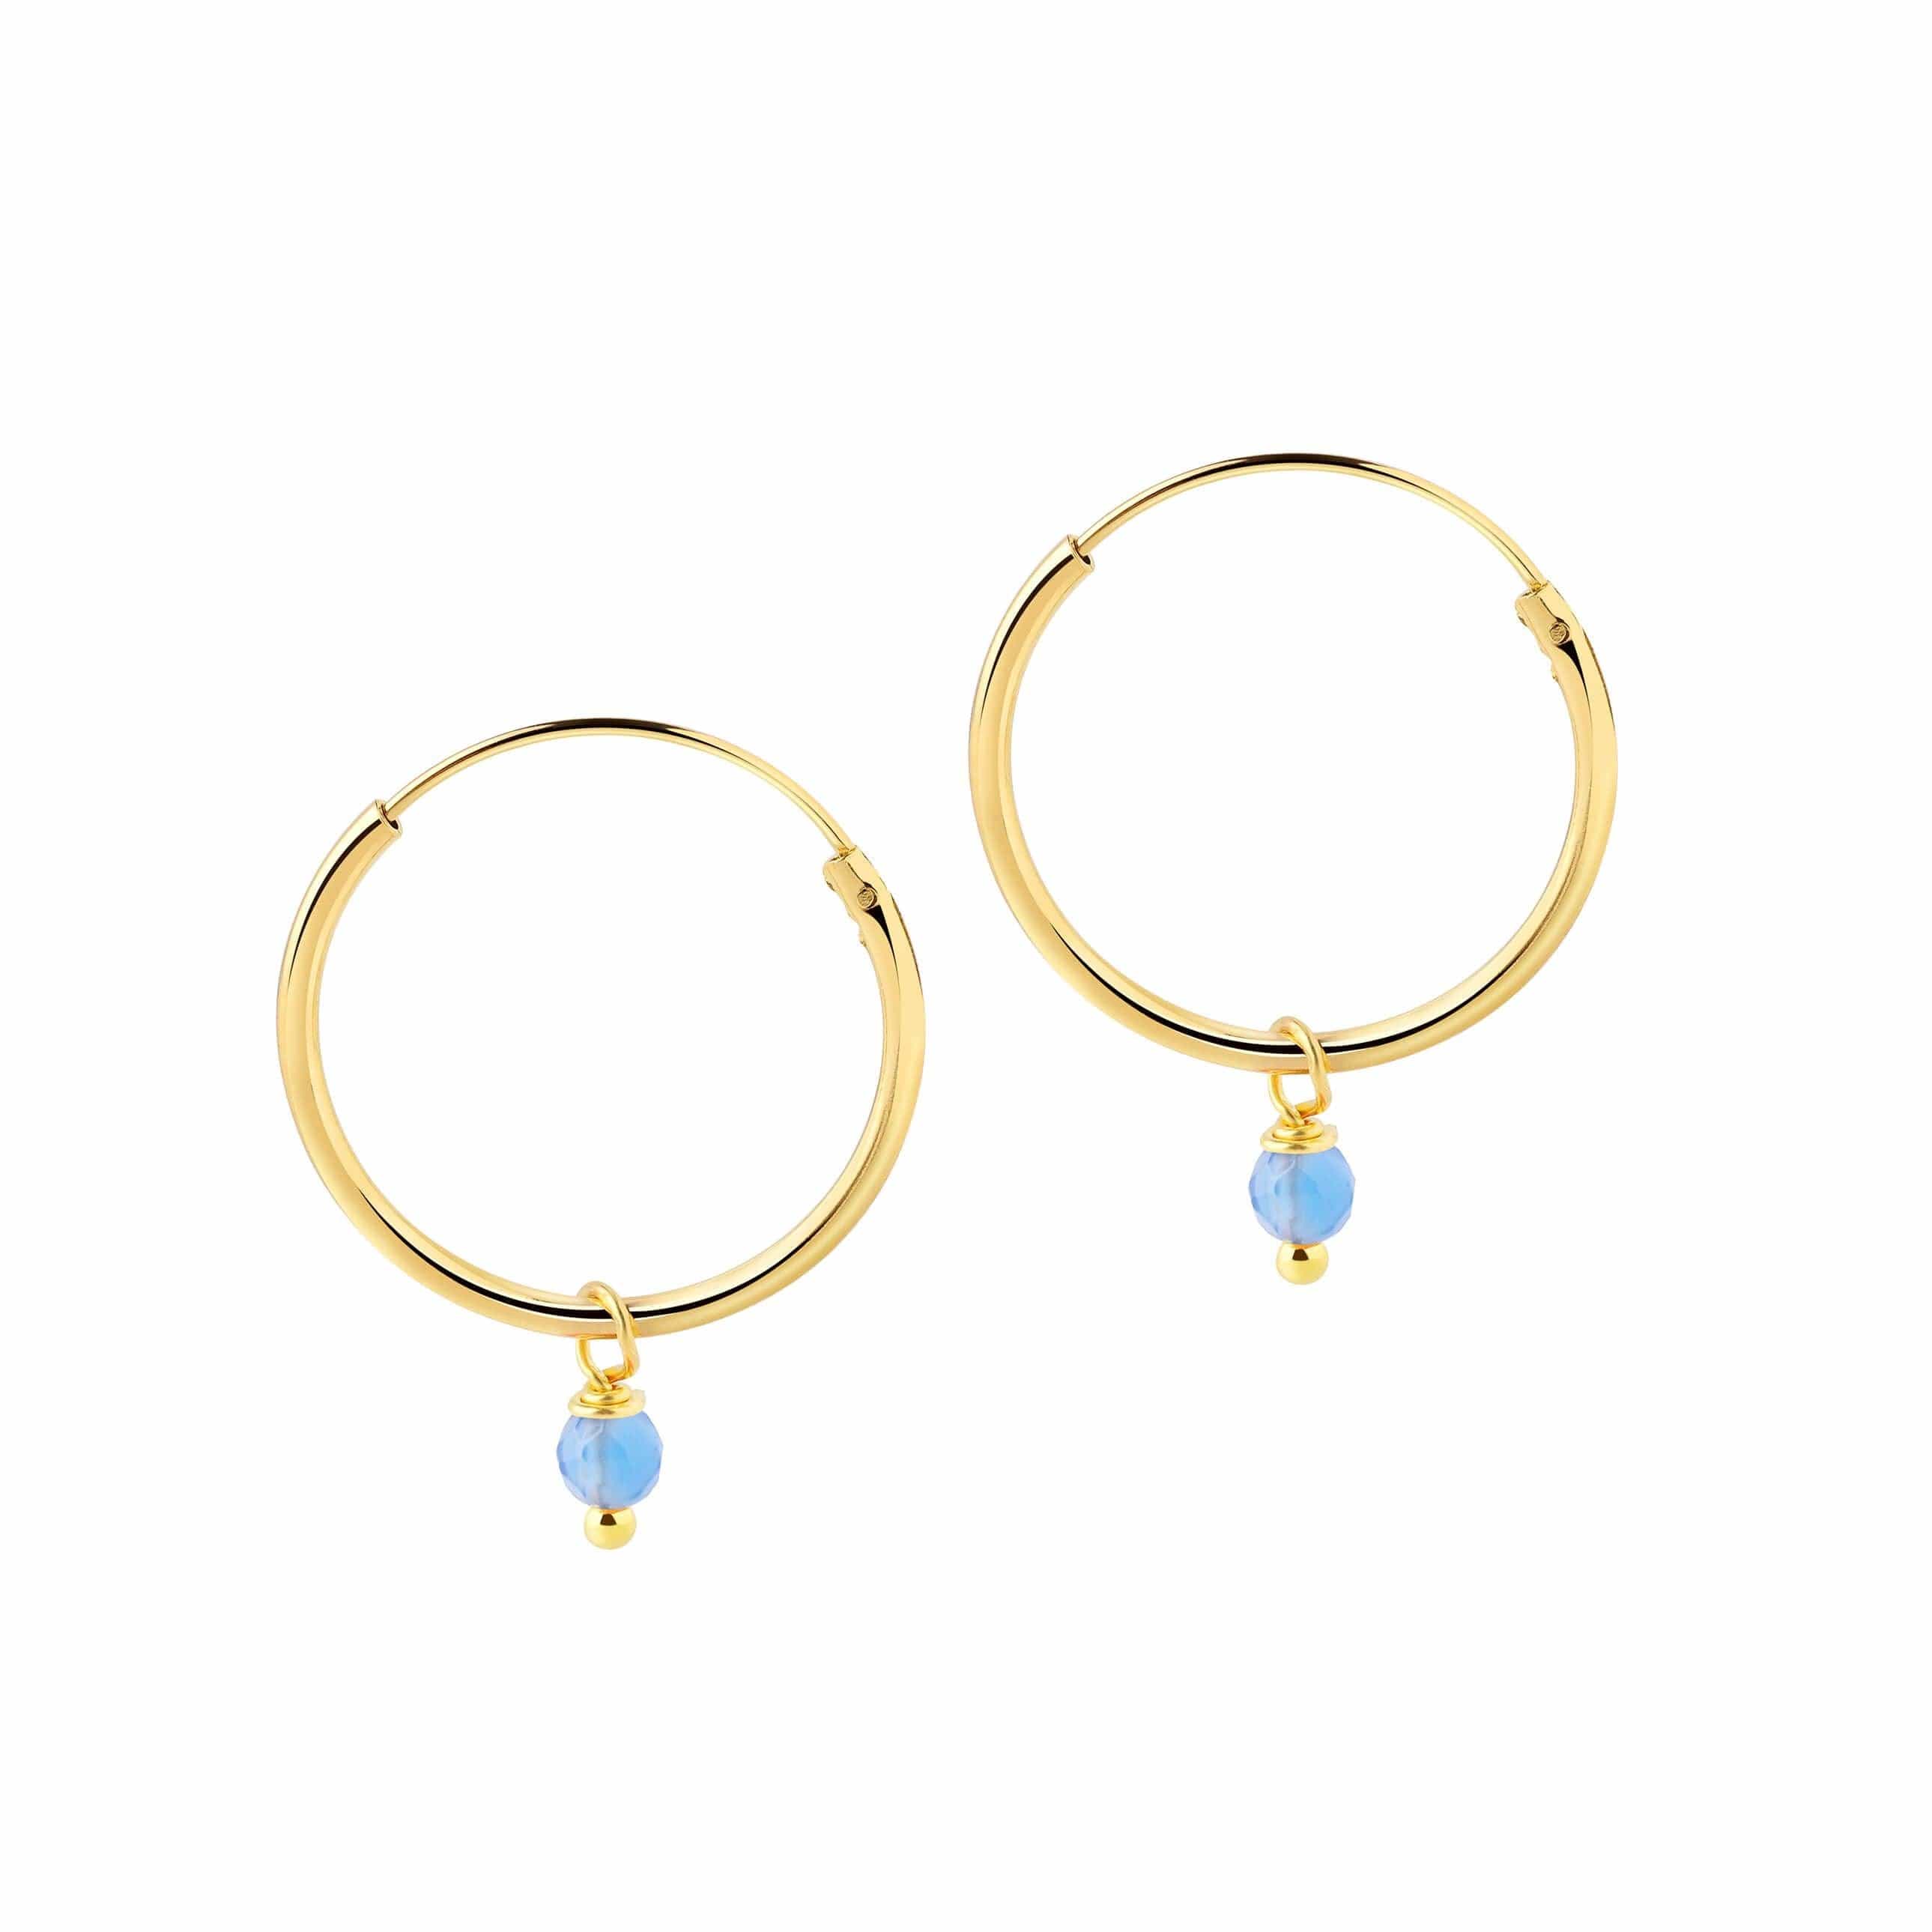 Gold Plated Hoop Earrings with Blue Stone 18mm